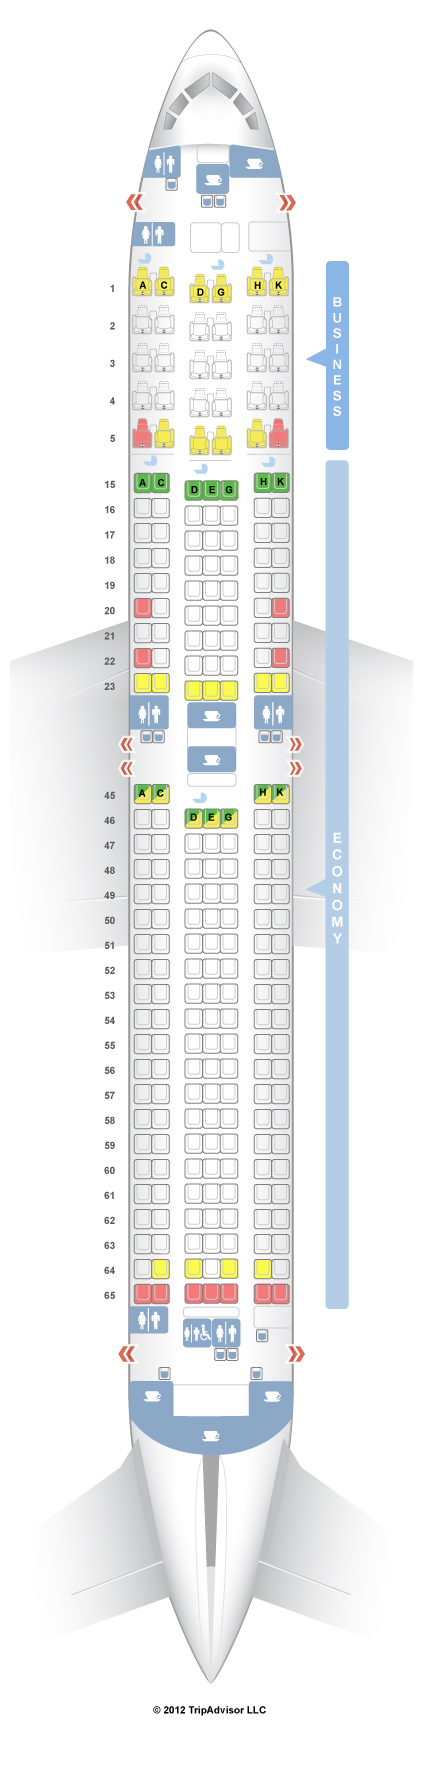 American airlines boeing 767 seating chart